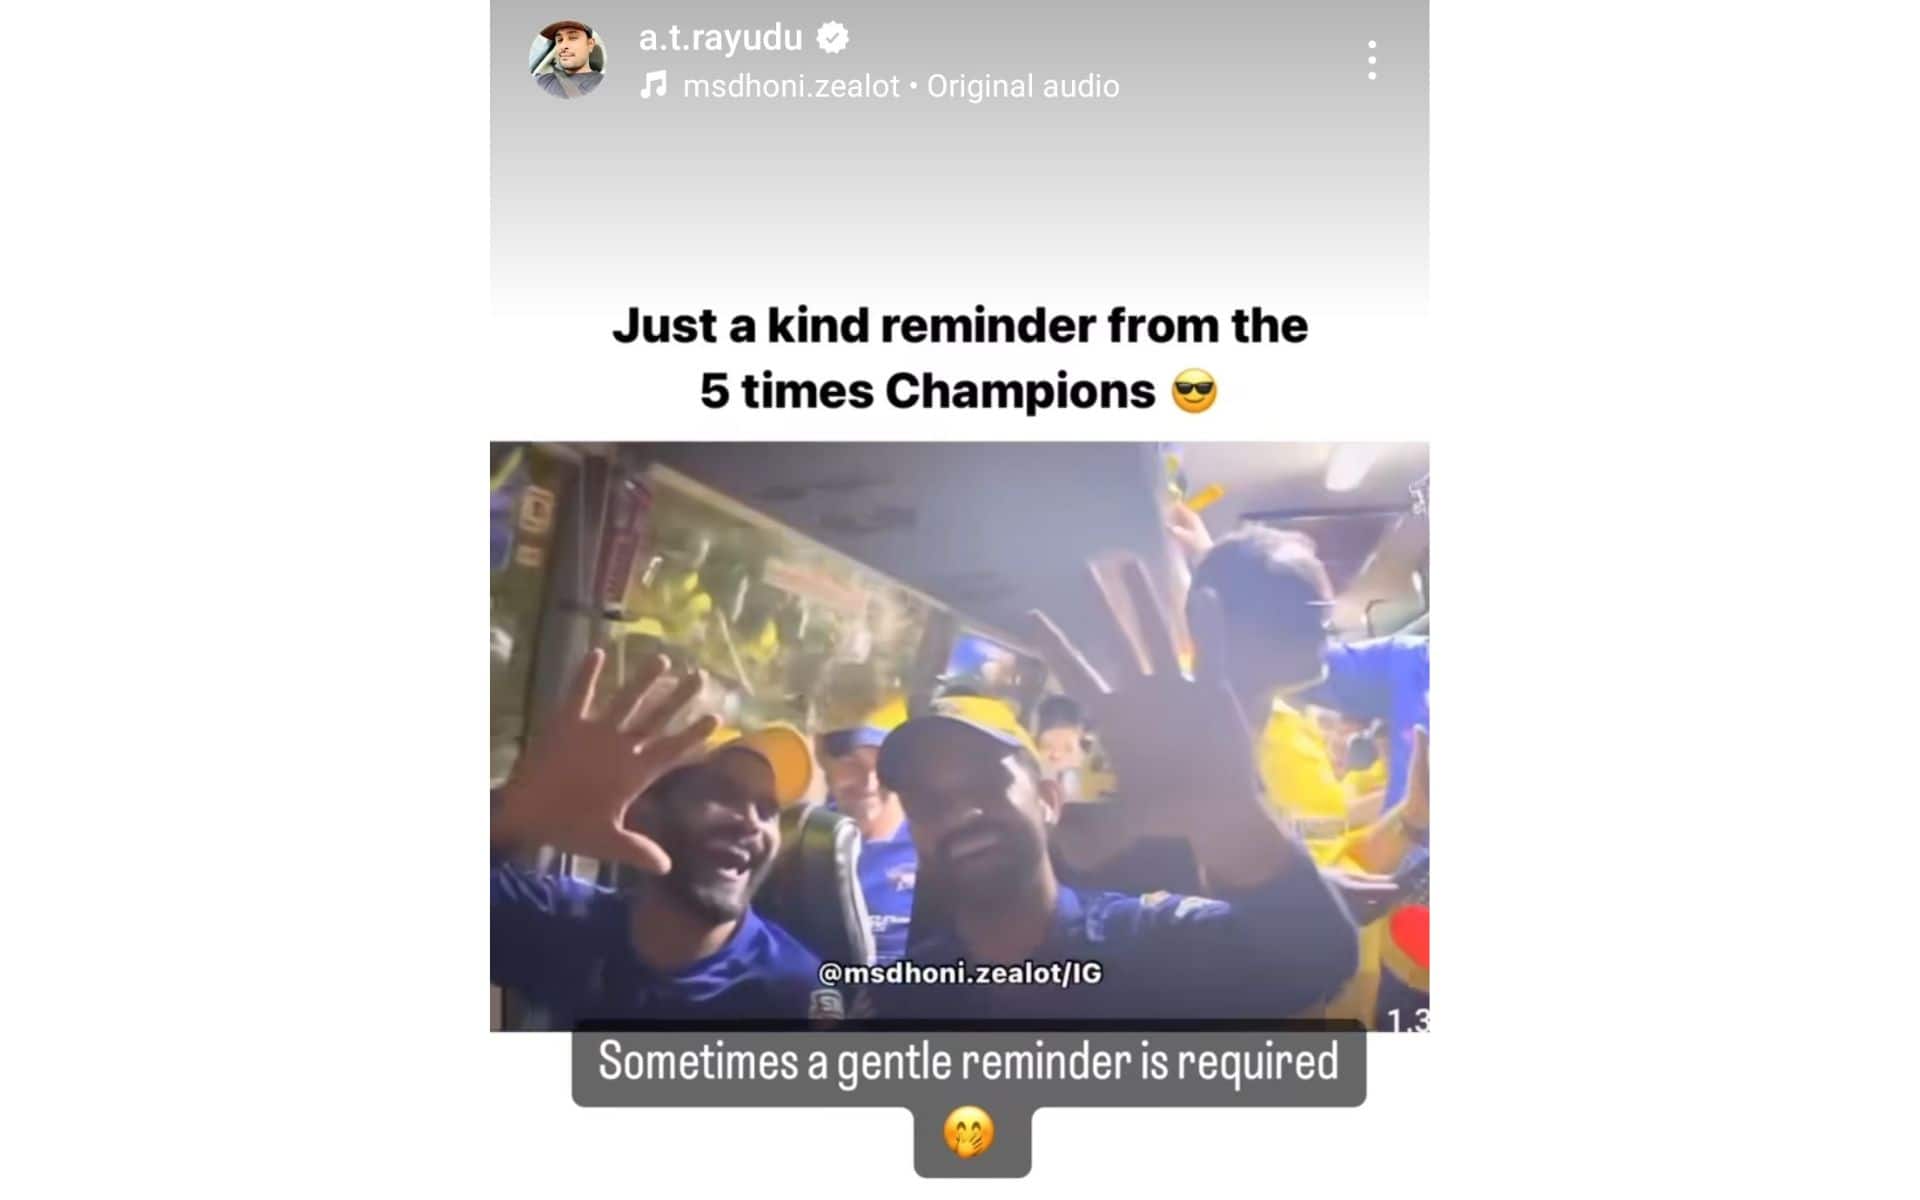 Rayudu teases RCB with a throwback picture